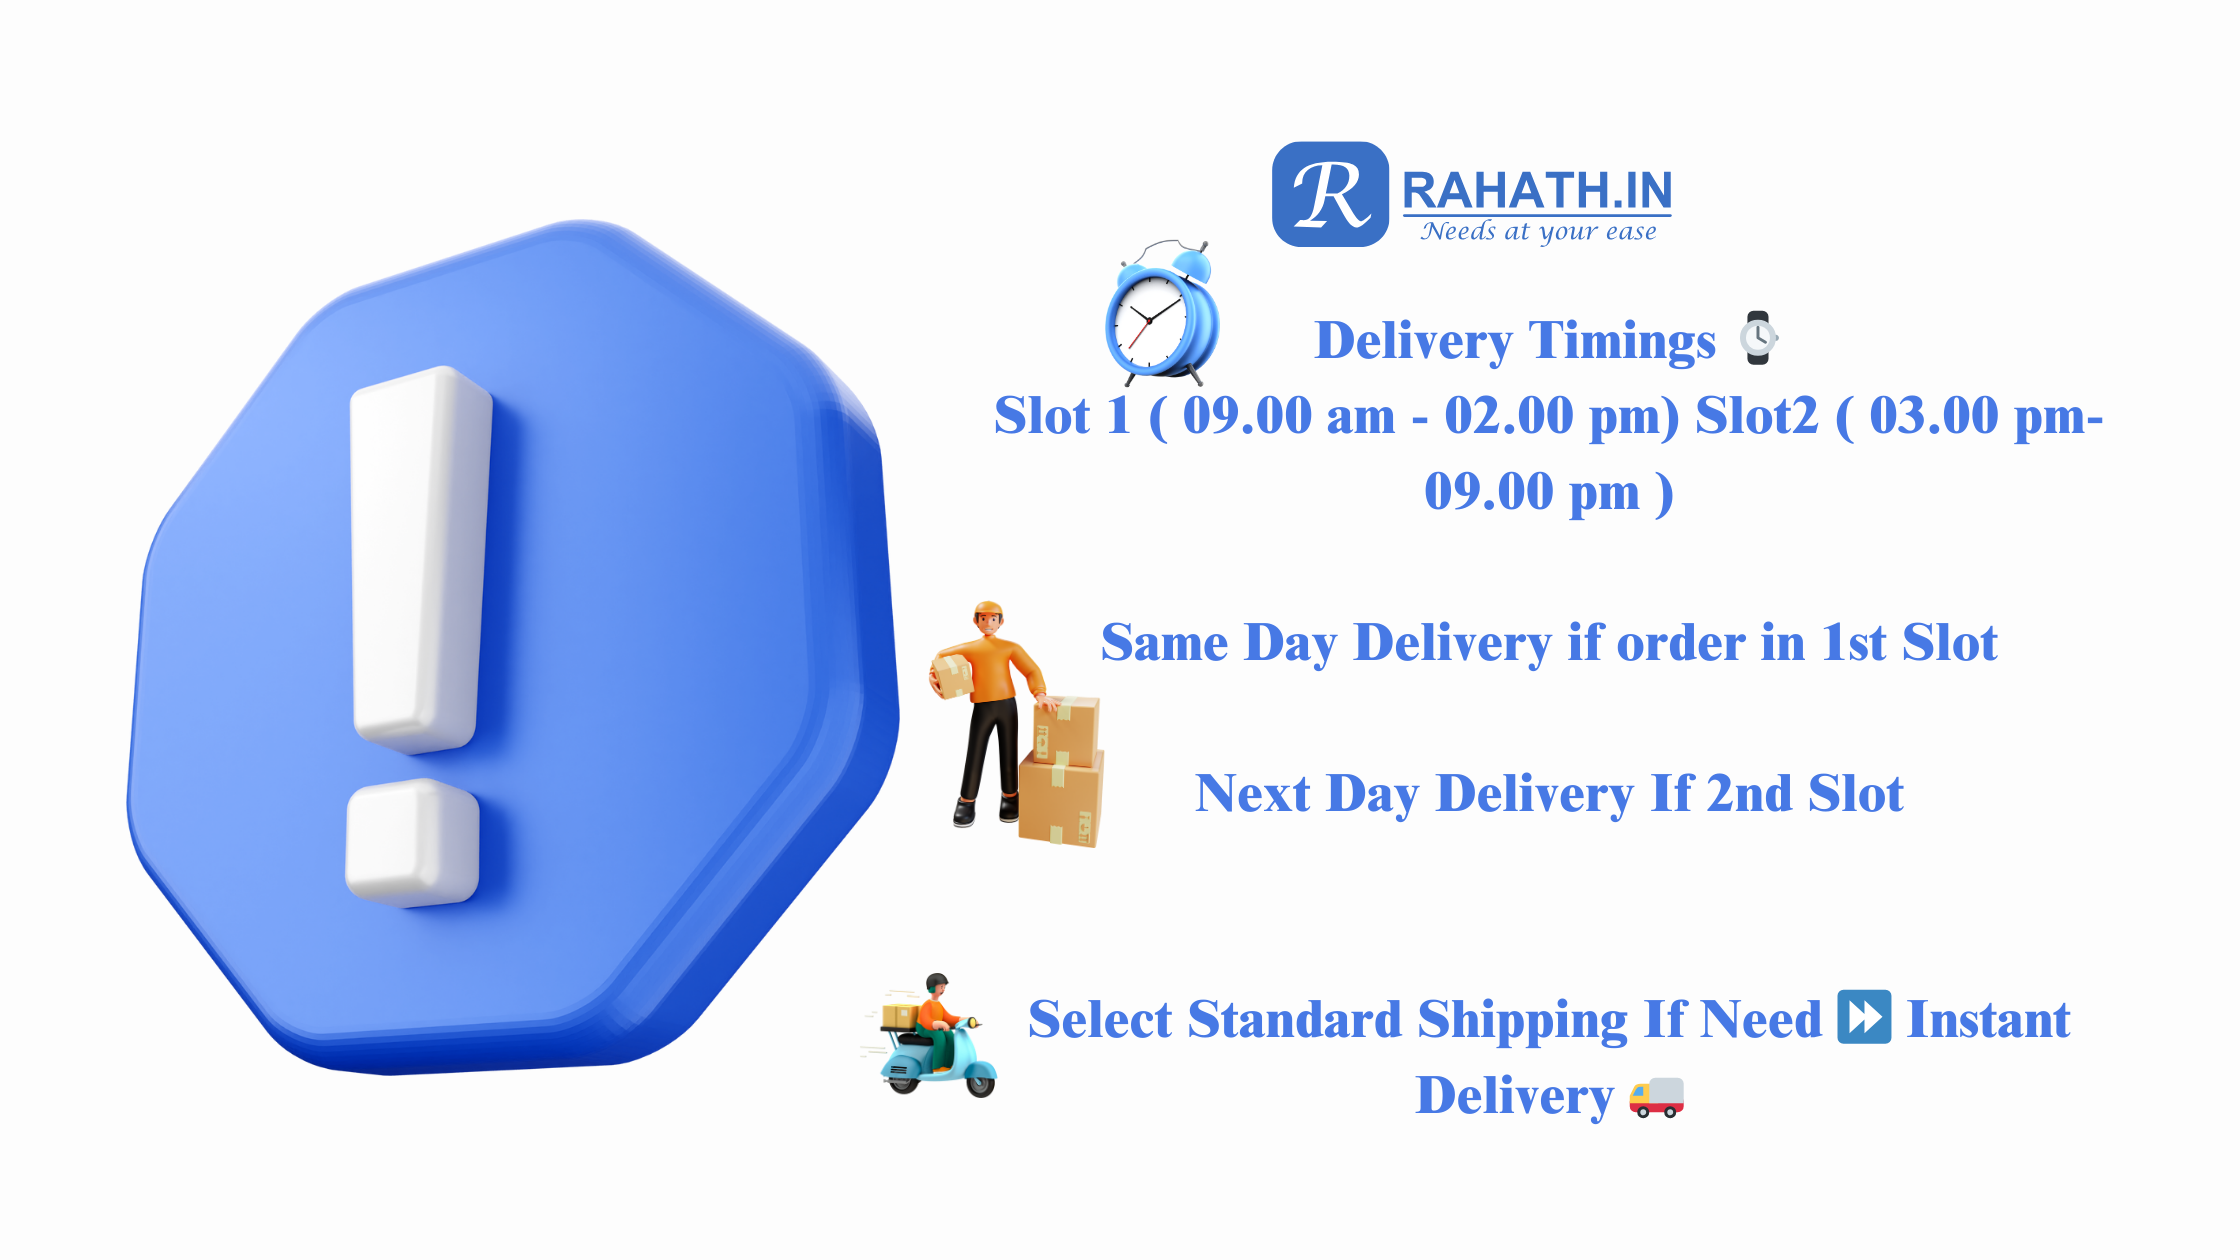 Delivery Timings ⌚ Slot 1 ( 09.00 am - 02.00 pm) Slot2 ( 03.00 pm- 09.00 pm ) Same Day Delivery if order in 1st Slot Next Day Delivery If 2nd Slot Select Standard Shipping If Need ⏩ Instant Delive